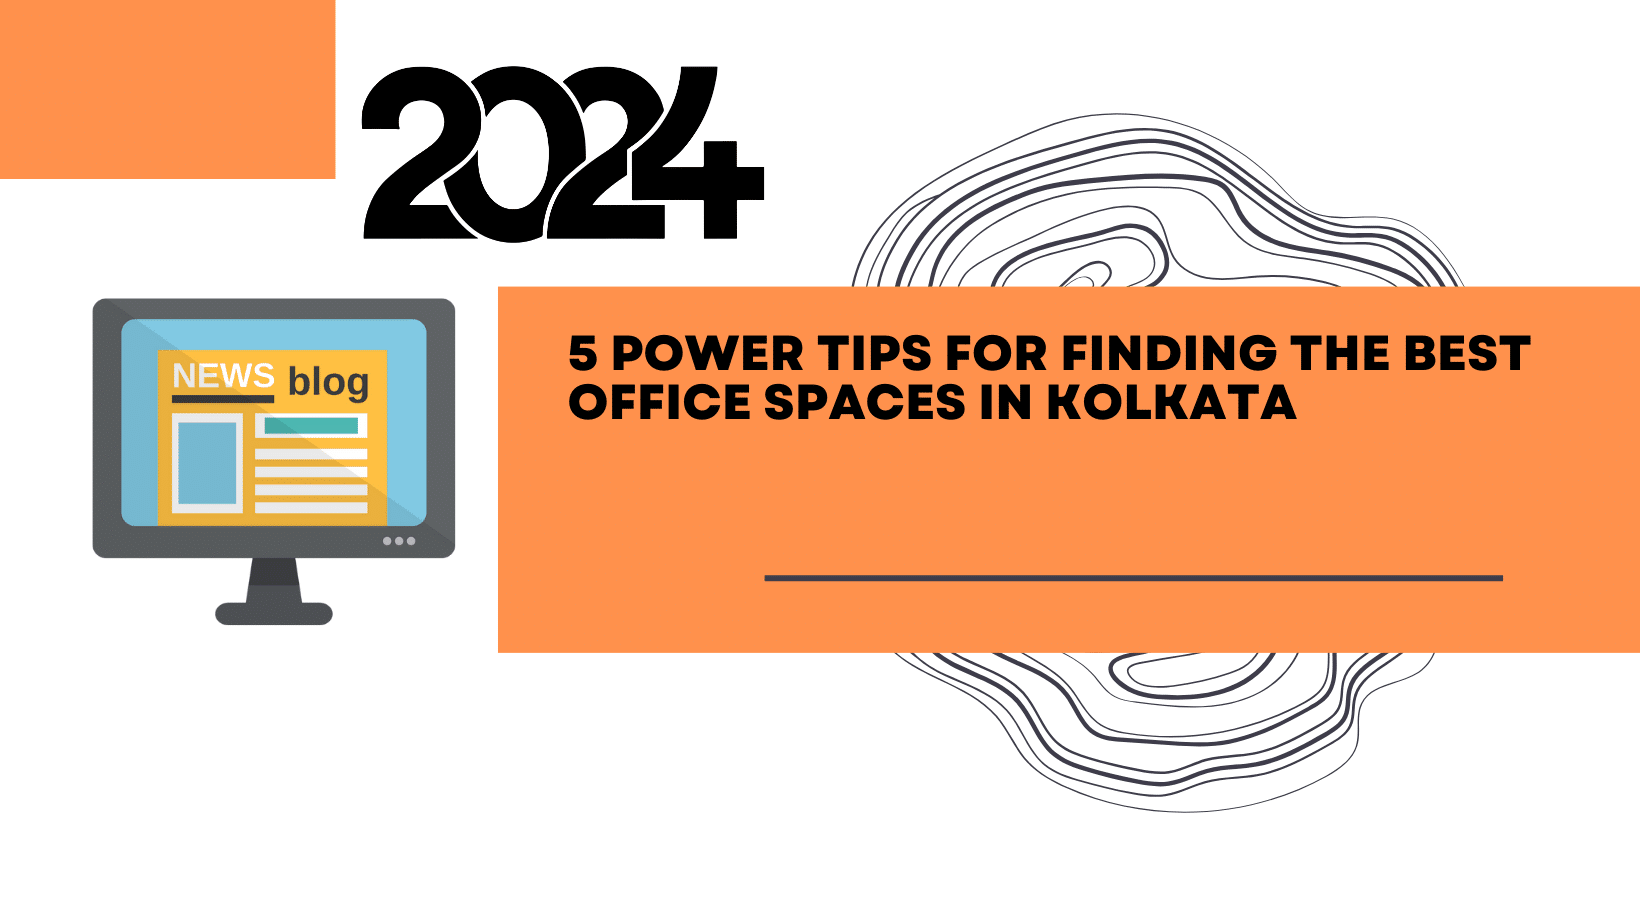 5 Power Tips for Finding the Best Office Spaces in Kolkata